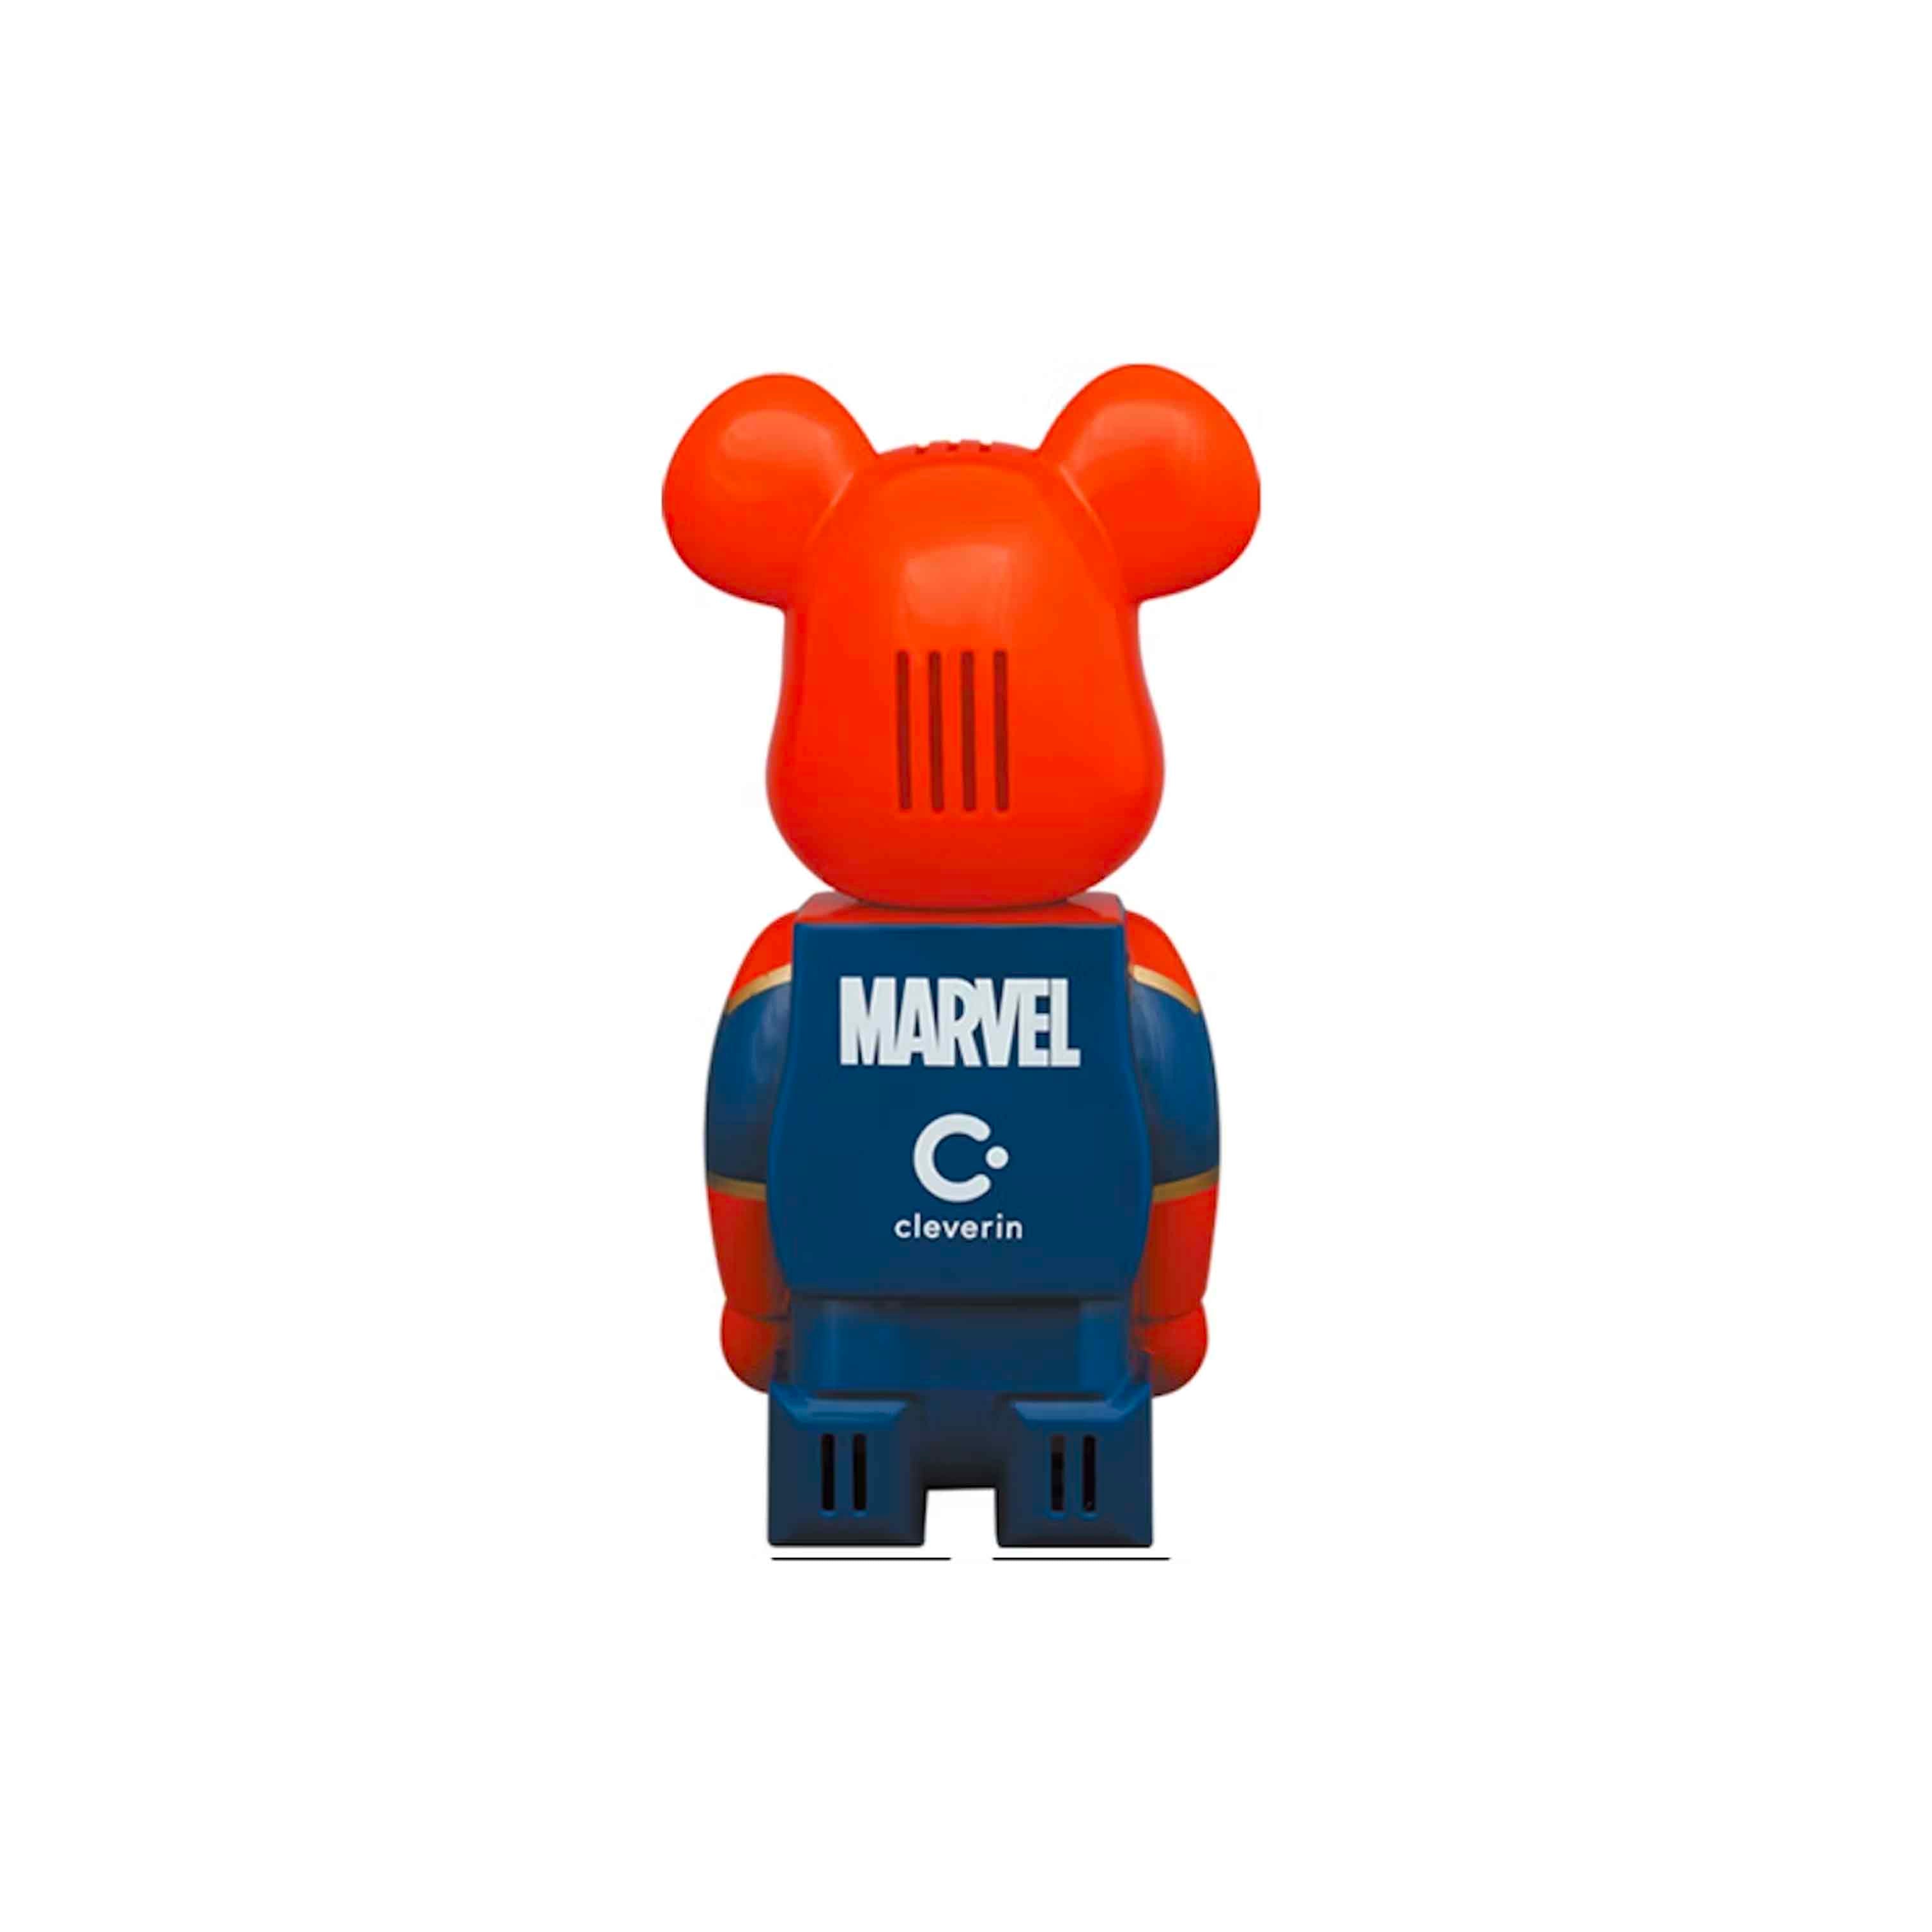 Bearbrick Cleverin Air Freshener "MARVEL" New Size OS